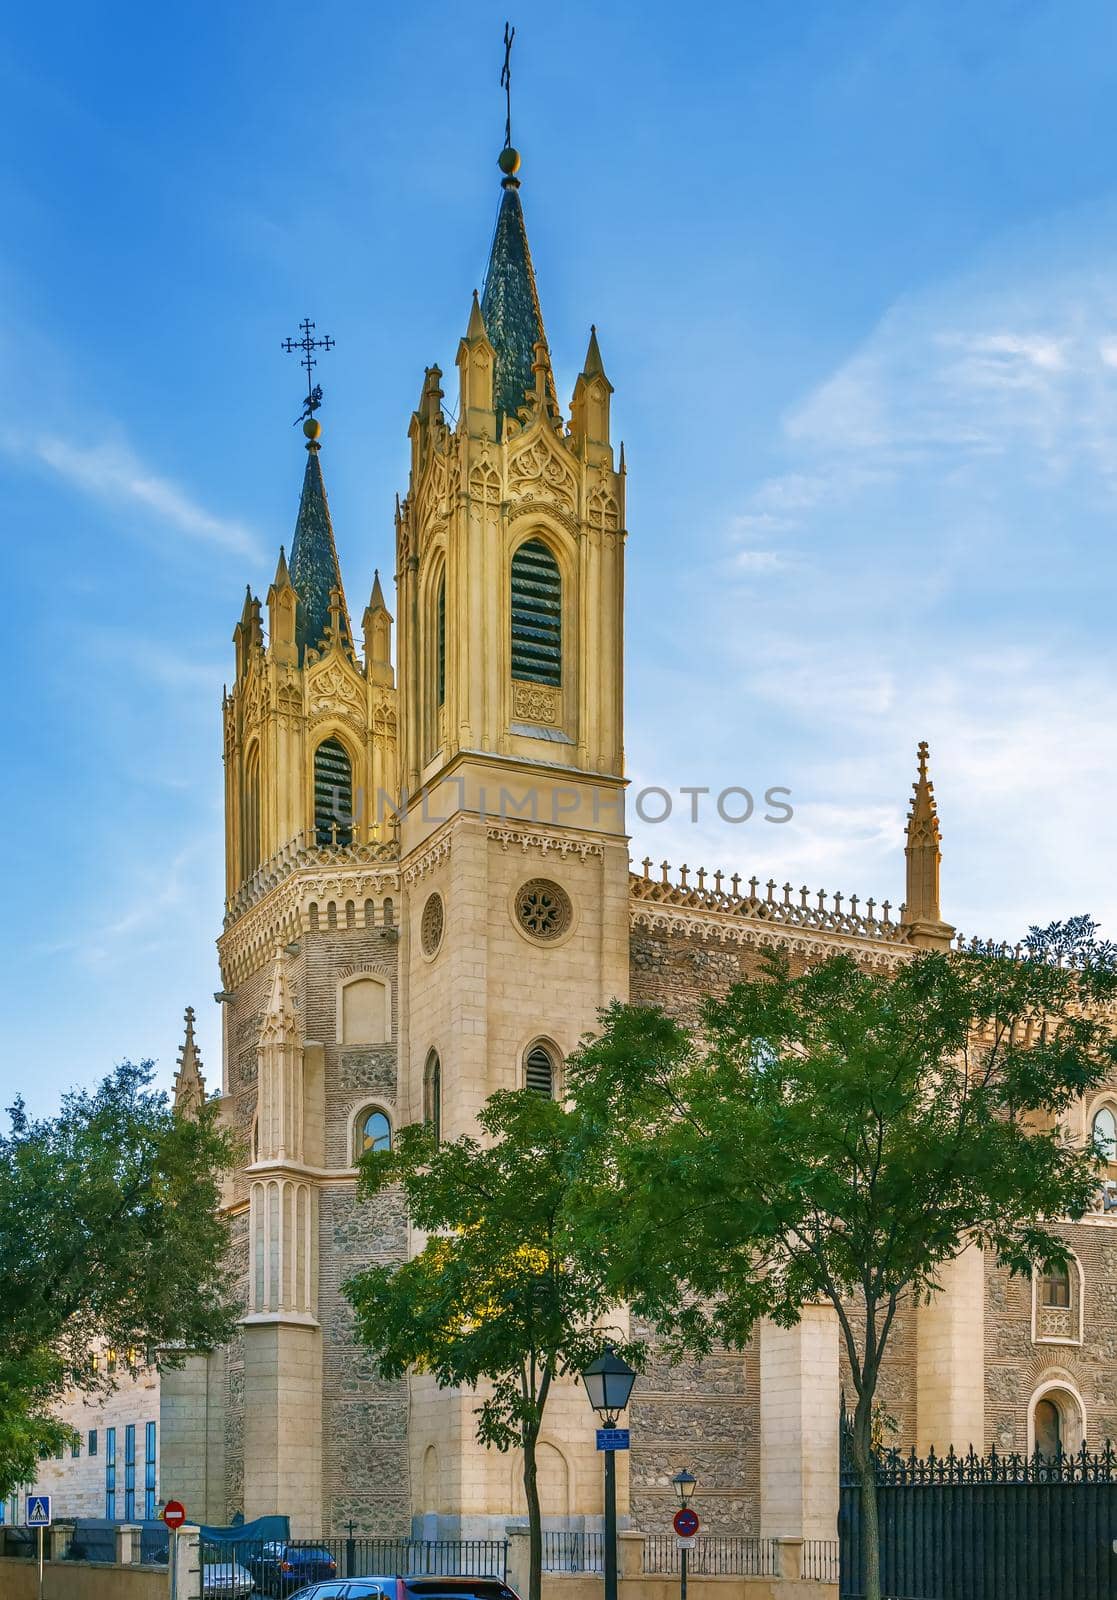 San Jeronimo el Real (St. Jerome Royal Church) is a Roman Catholic church from the early 16th-century in central Madrid, Spain